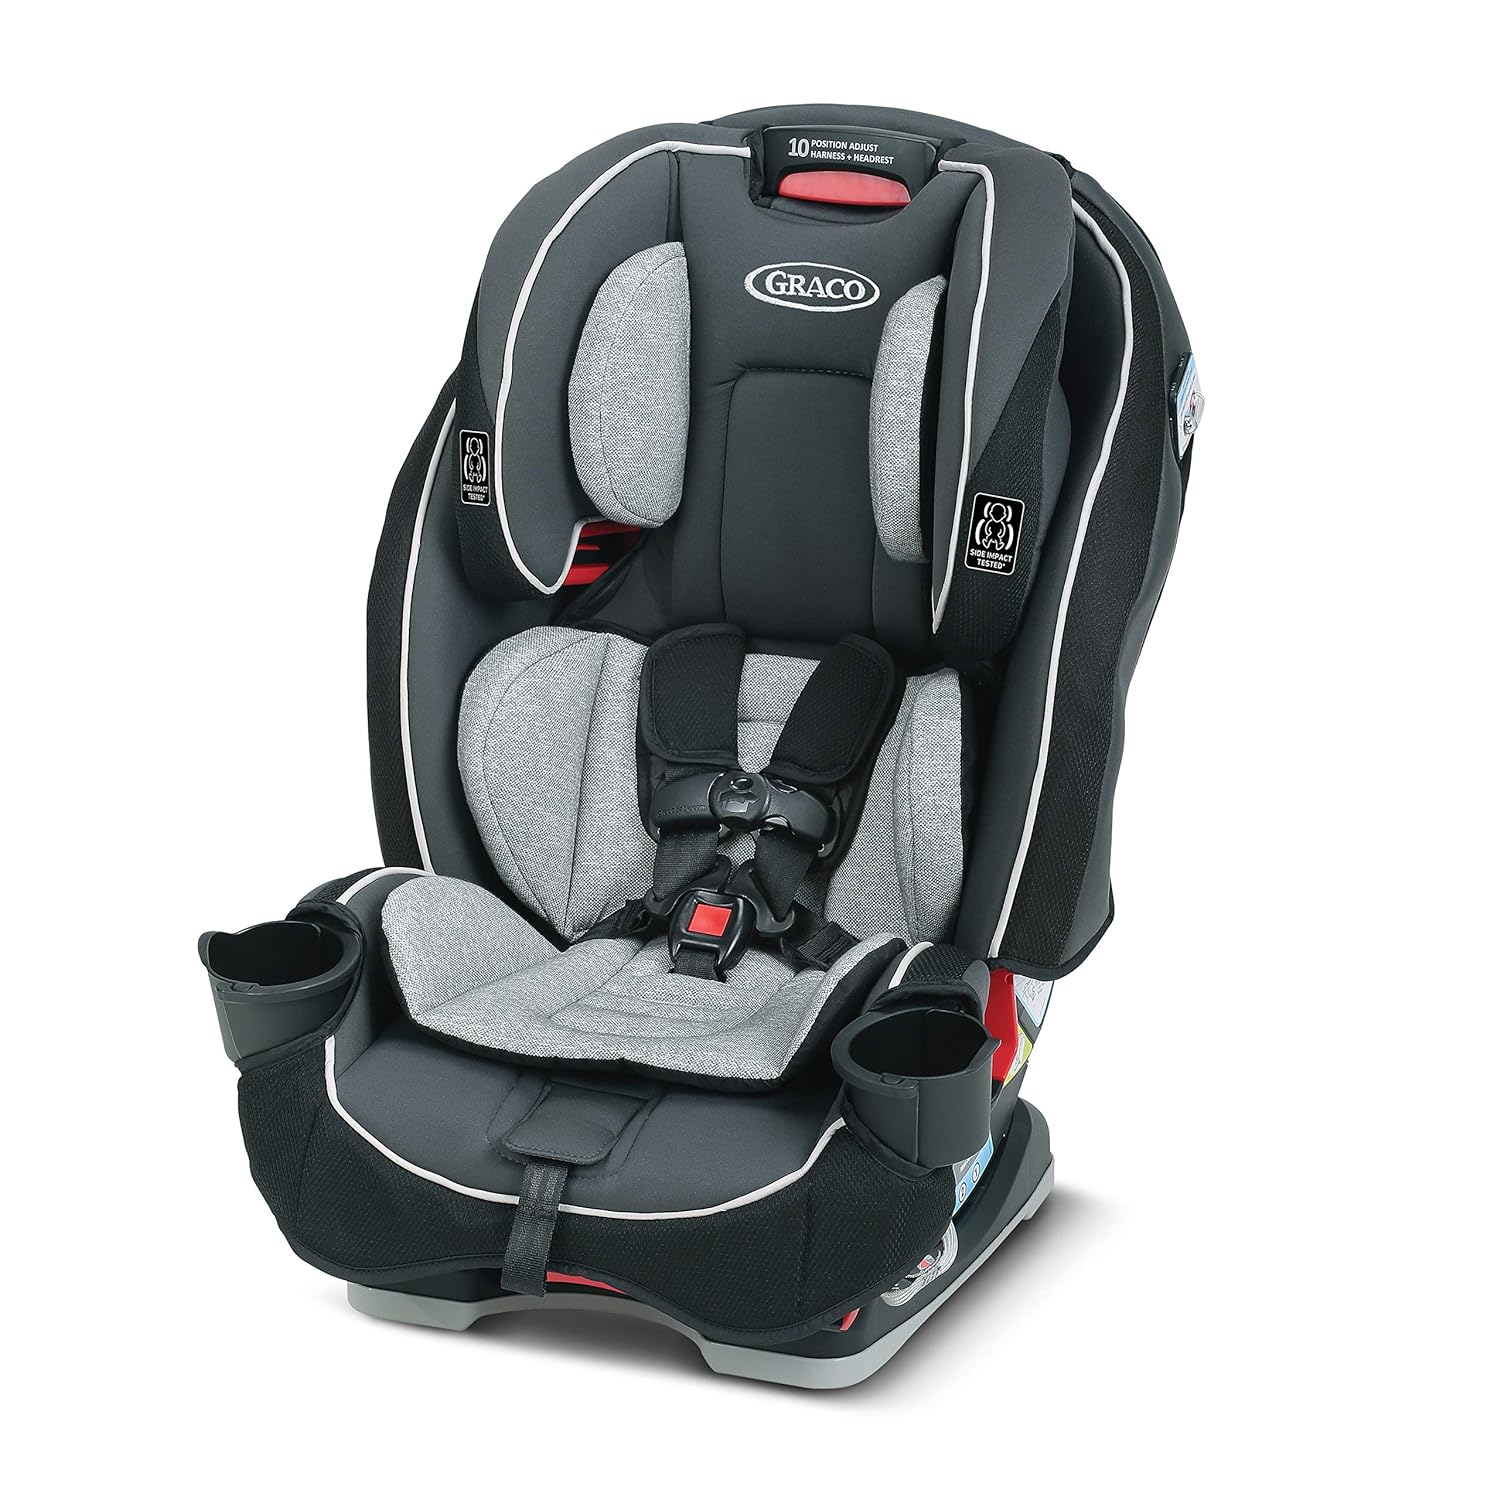 Best Car Seat with Isofix: Top Picks for Secure and Convenient Child Safety